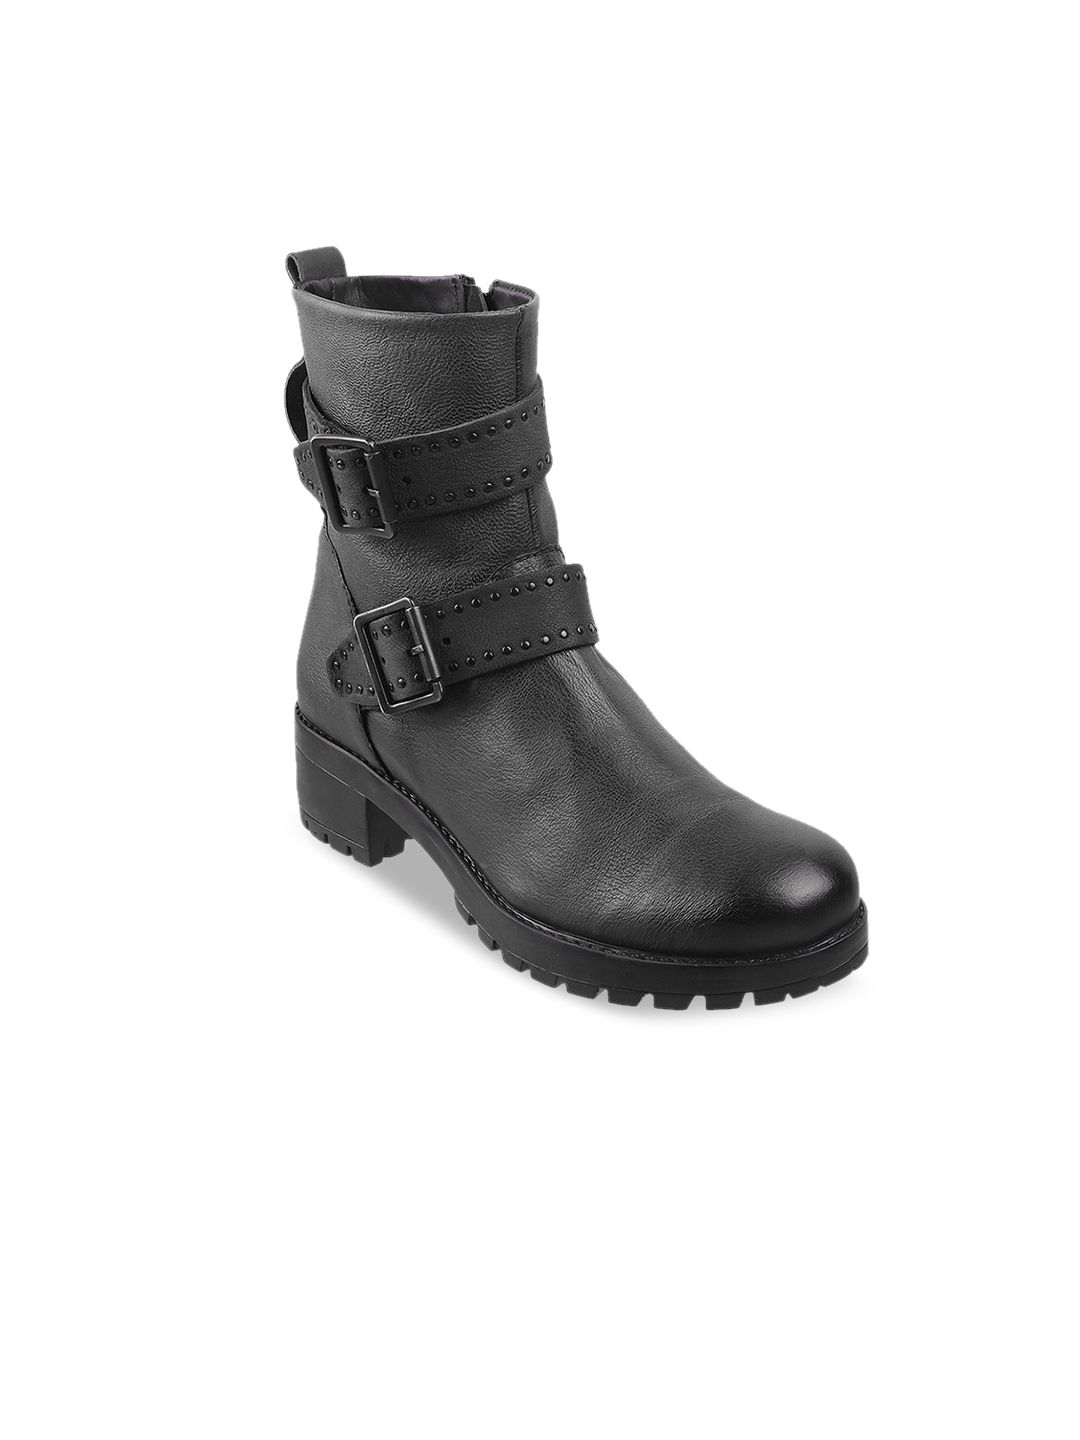 Metro Black Block Heeled Boots with Buckles Price in India